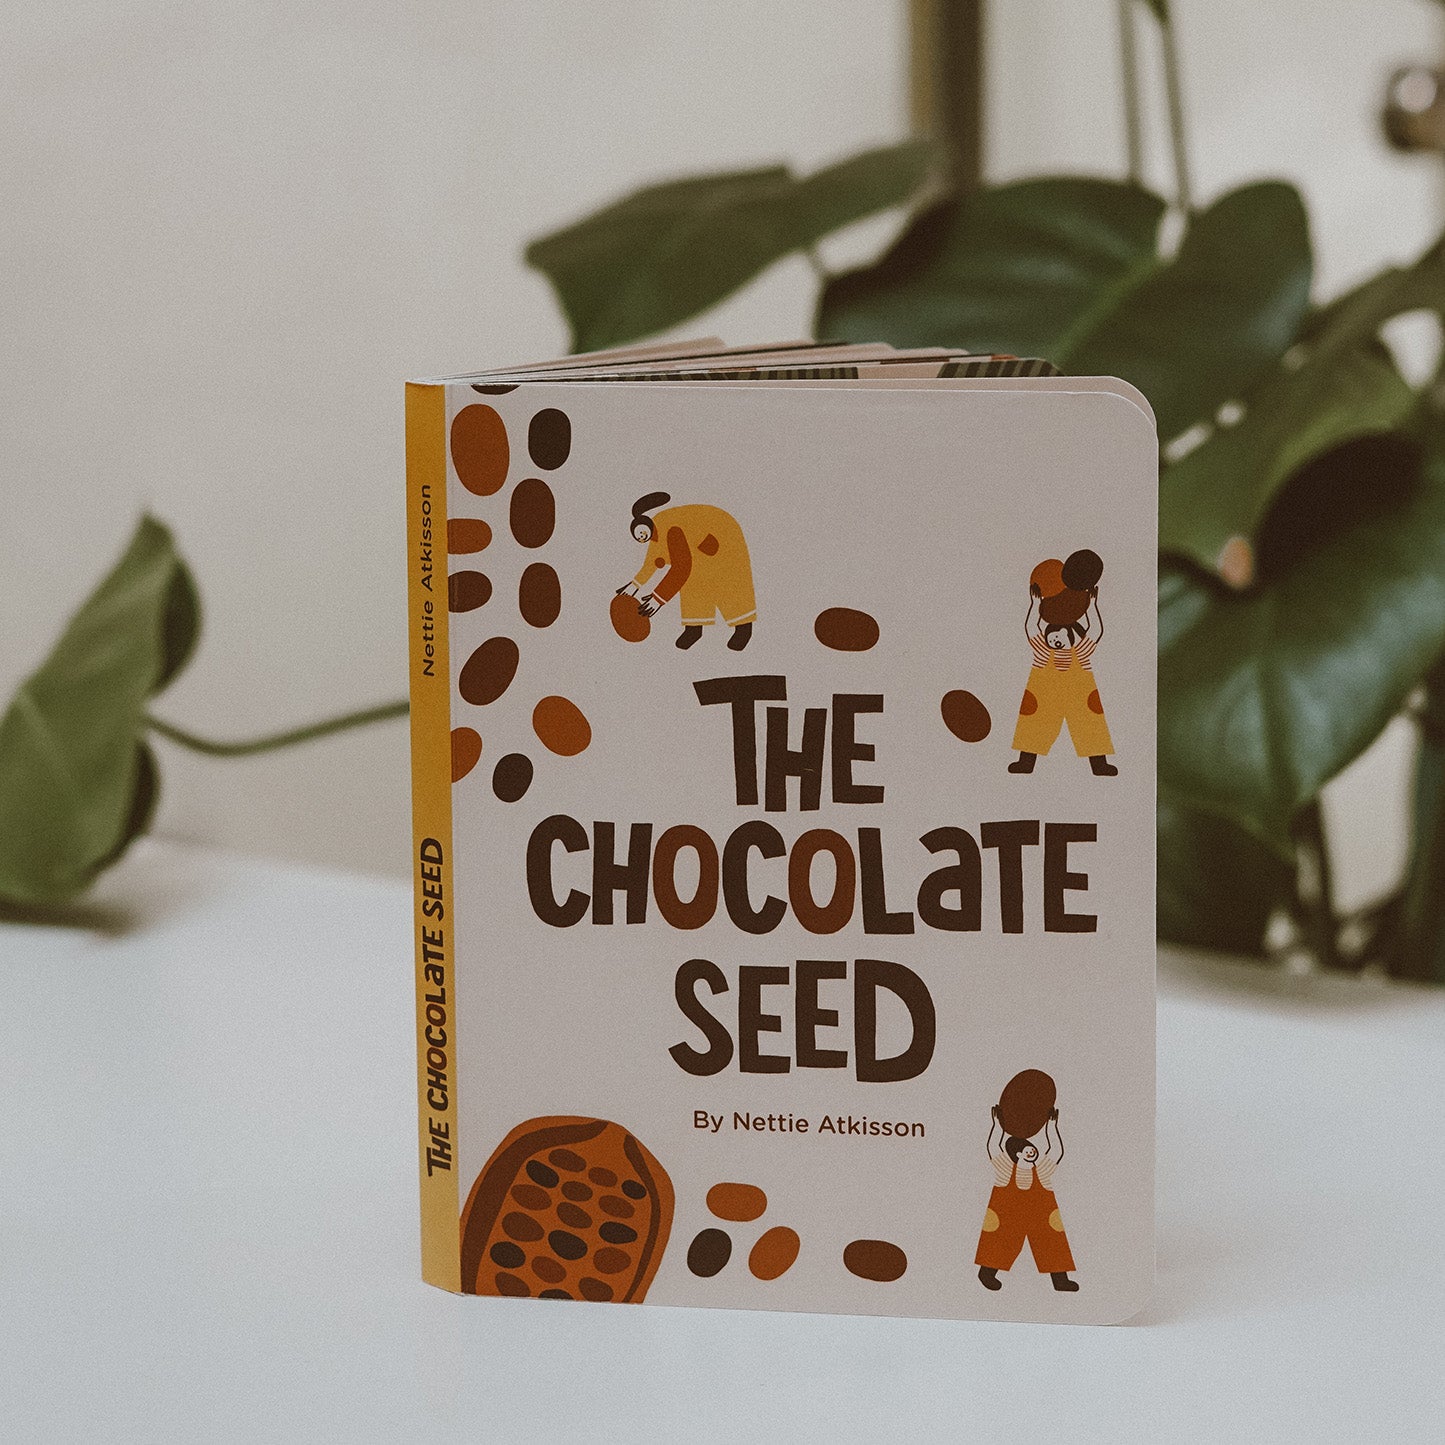 The Chocolate Seed by Nettie Atkisson